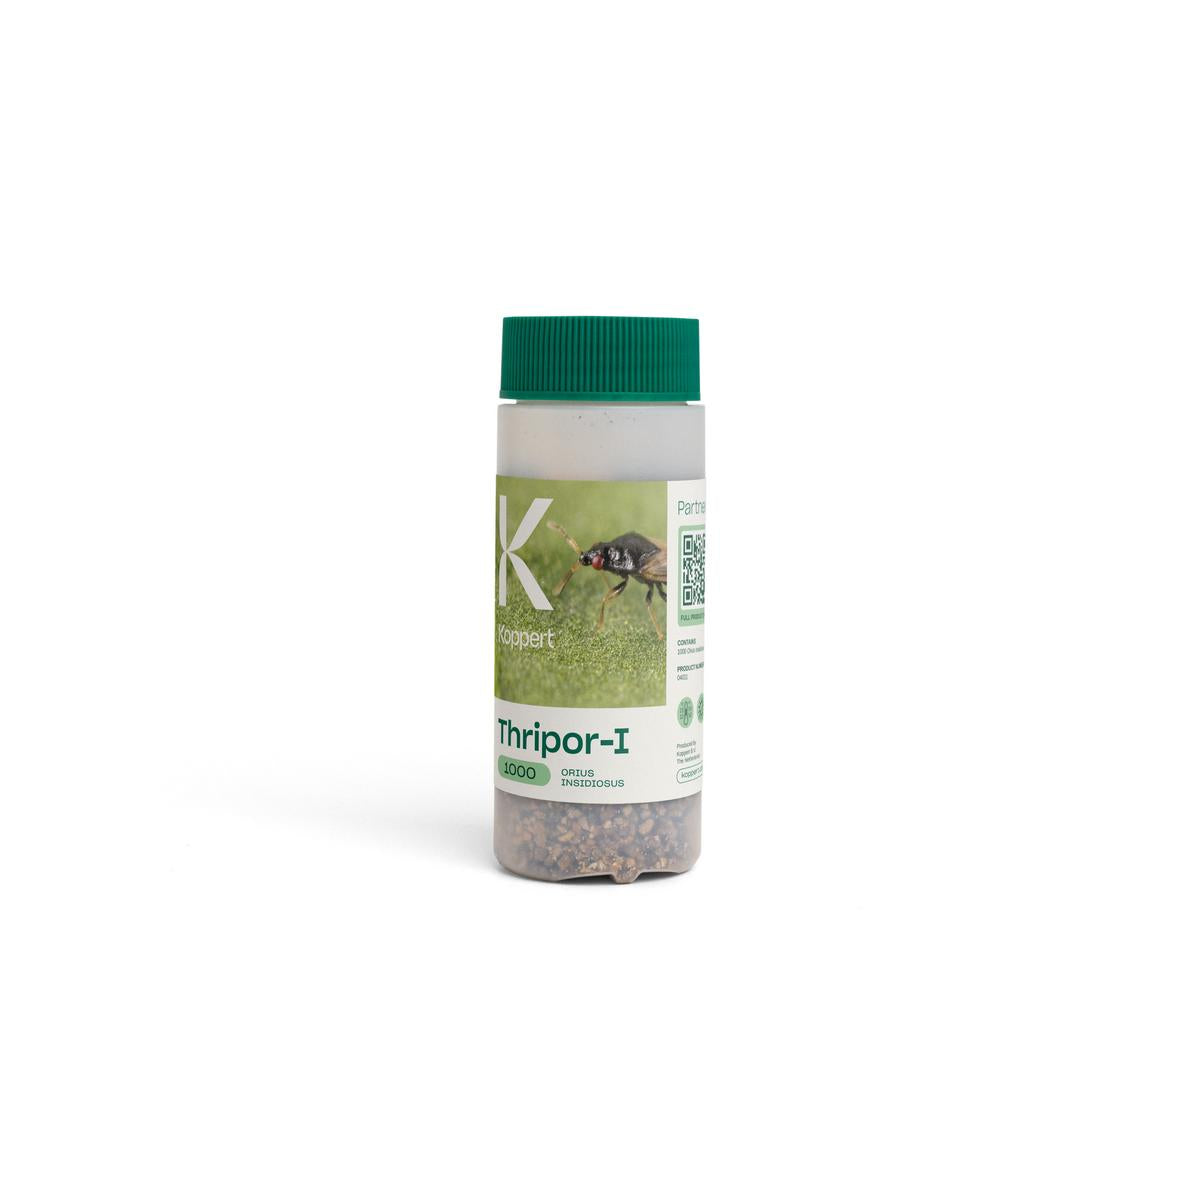 Small 100ml bottle of thripor-l 1000